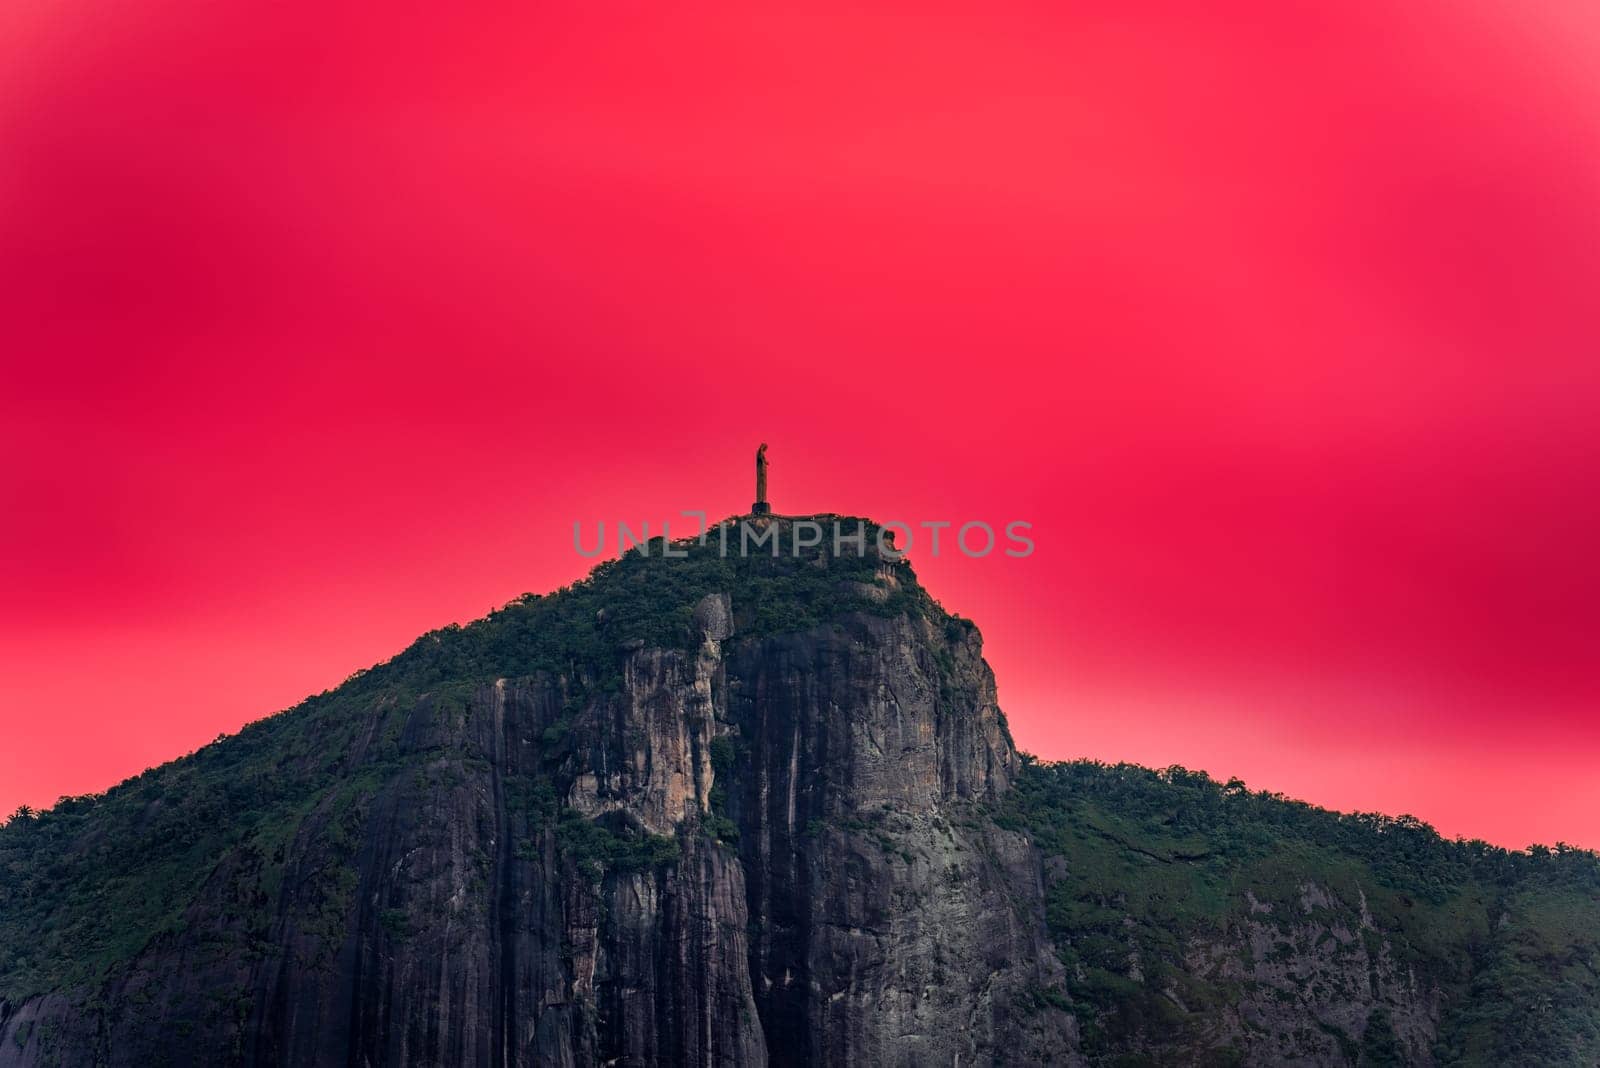 Majestic Christ Statue Overlooking the Dangerous Rio with a Red Sky by FerradalFCG